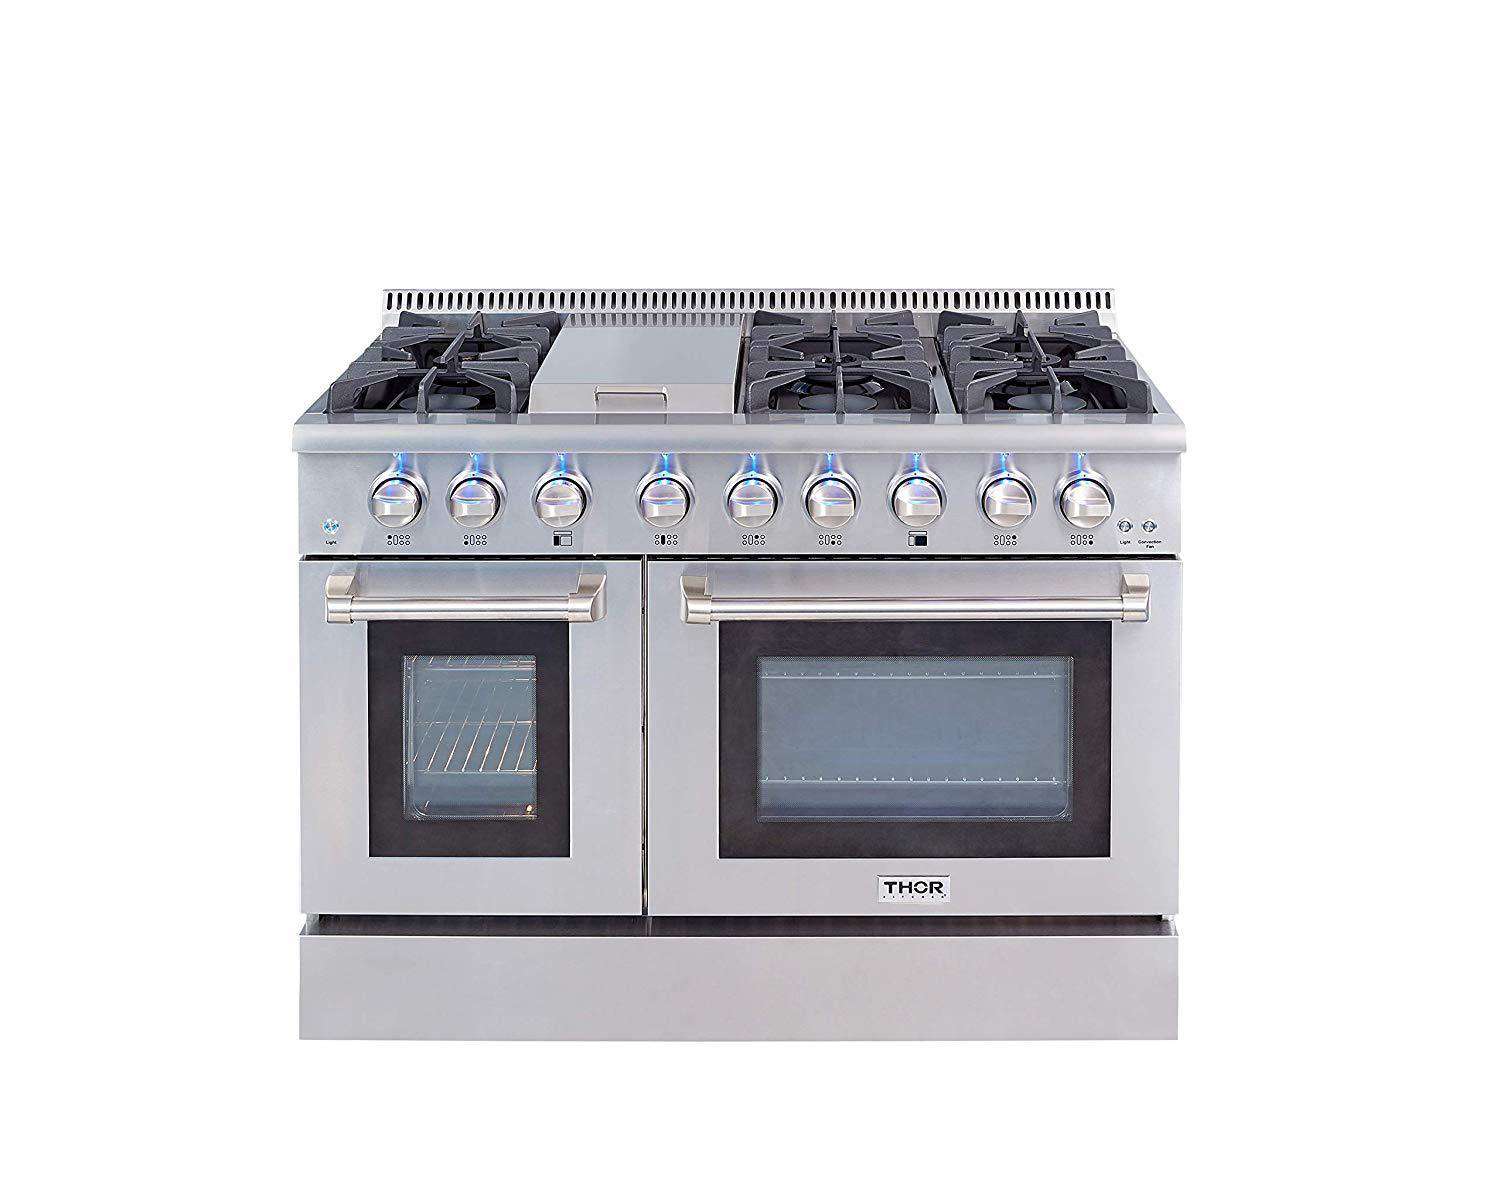 Thor Kitchen HRG4808U 48 in. Professional Gas Range with Double Oven 6 Burners Blue Porcelain Interior Stainless Steel New